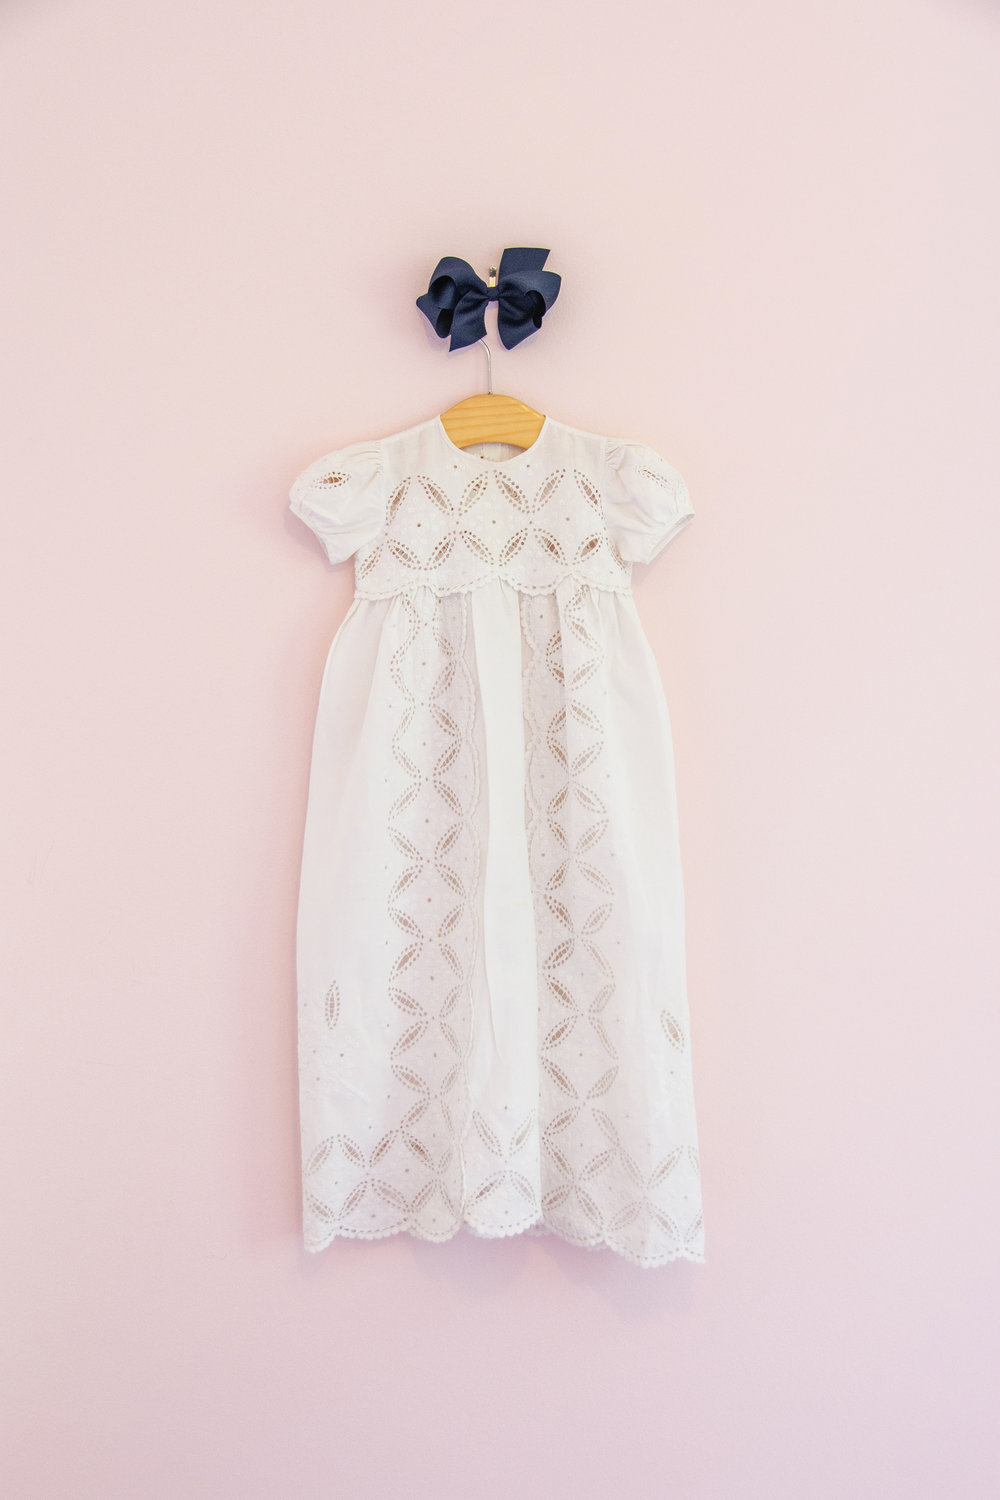 FAMILY TREASURE—The fabric of this christening gown forms a pattern of love knitting together generation after generation of one family.